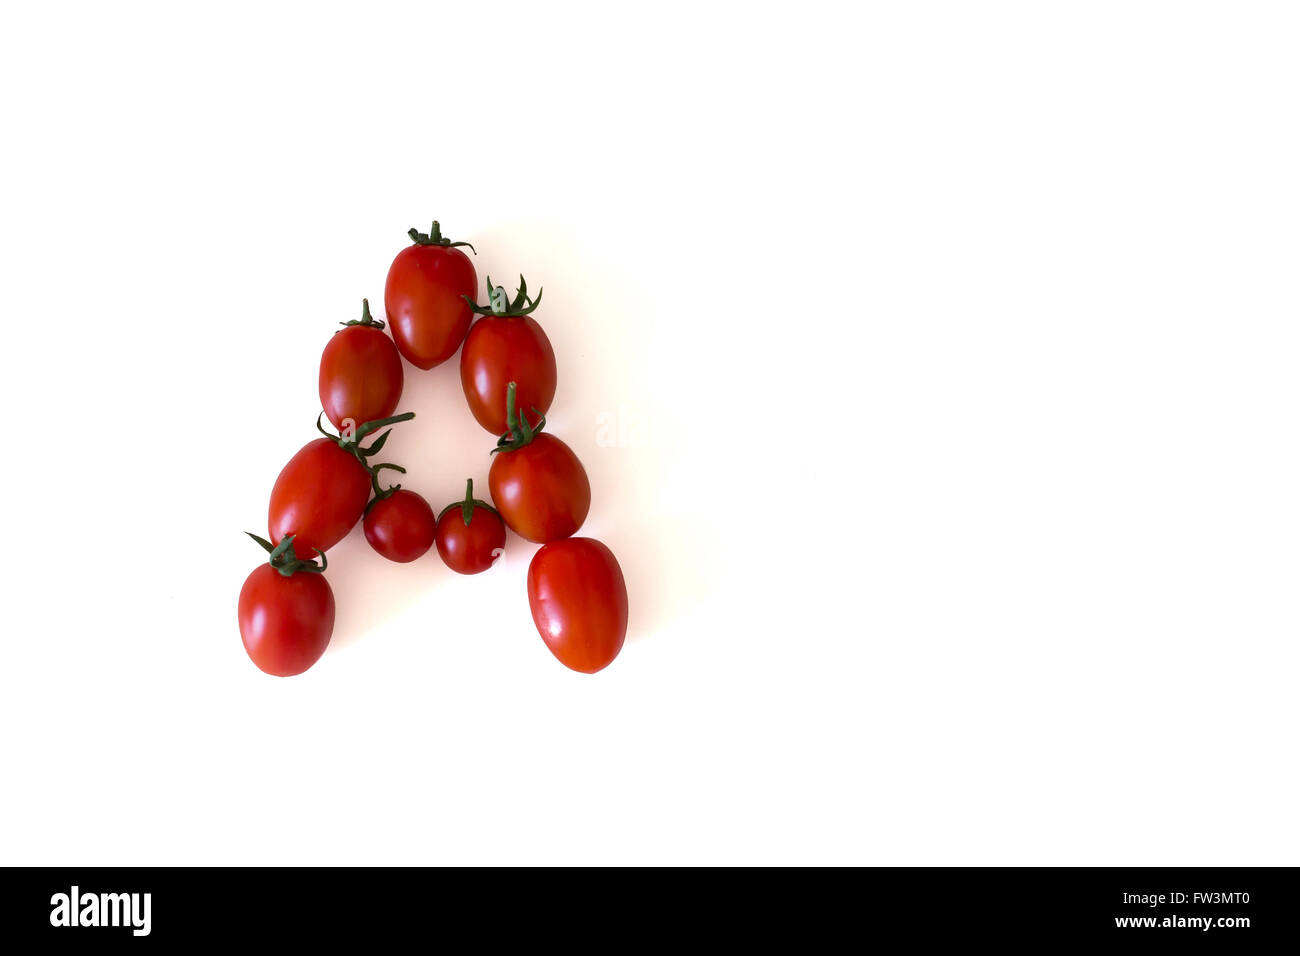 Letter A made out of small bright tomatoes Stock Photo